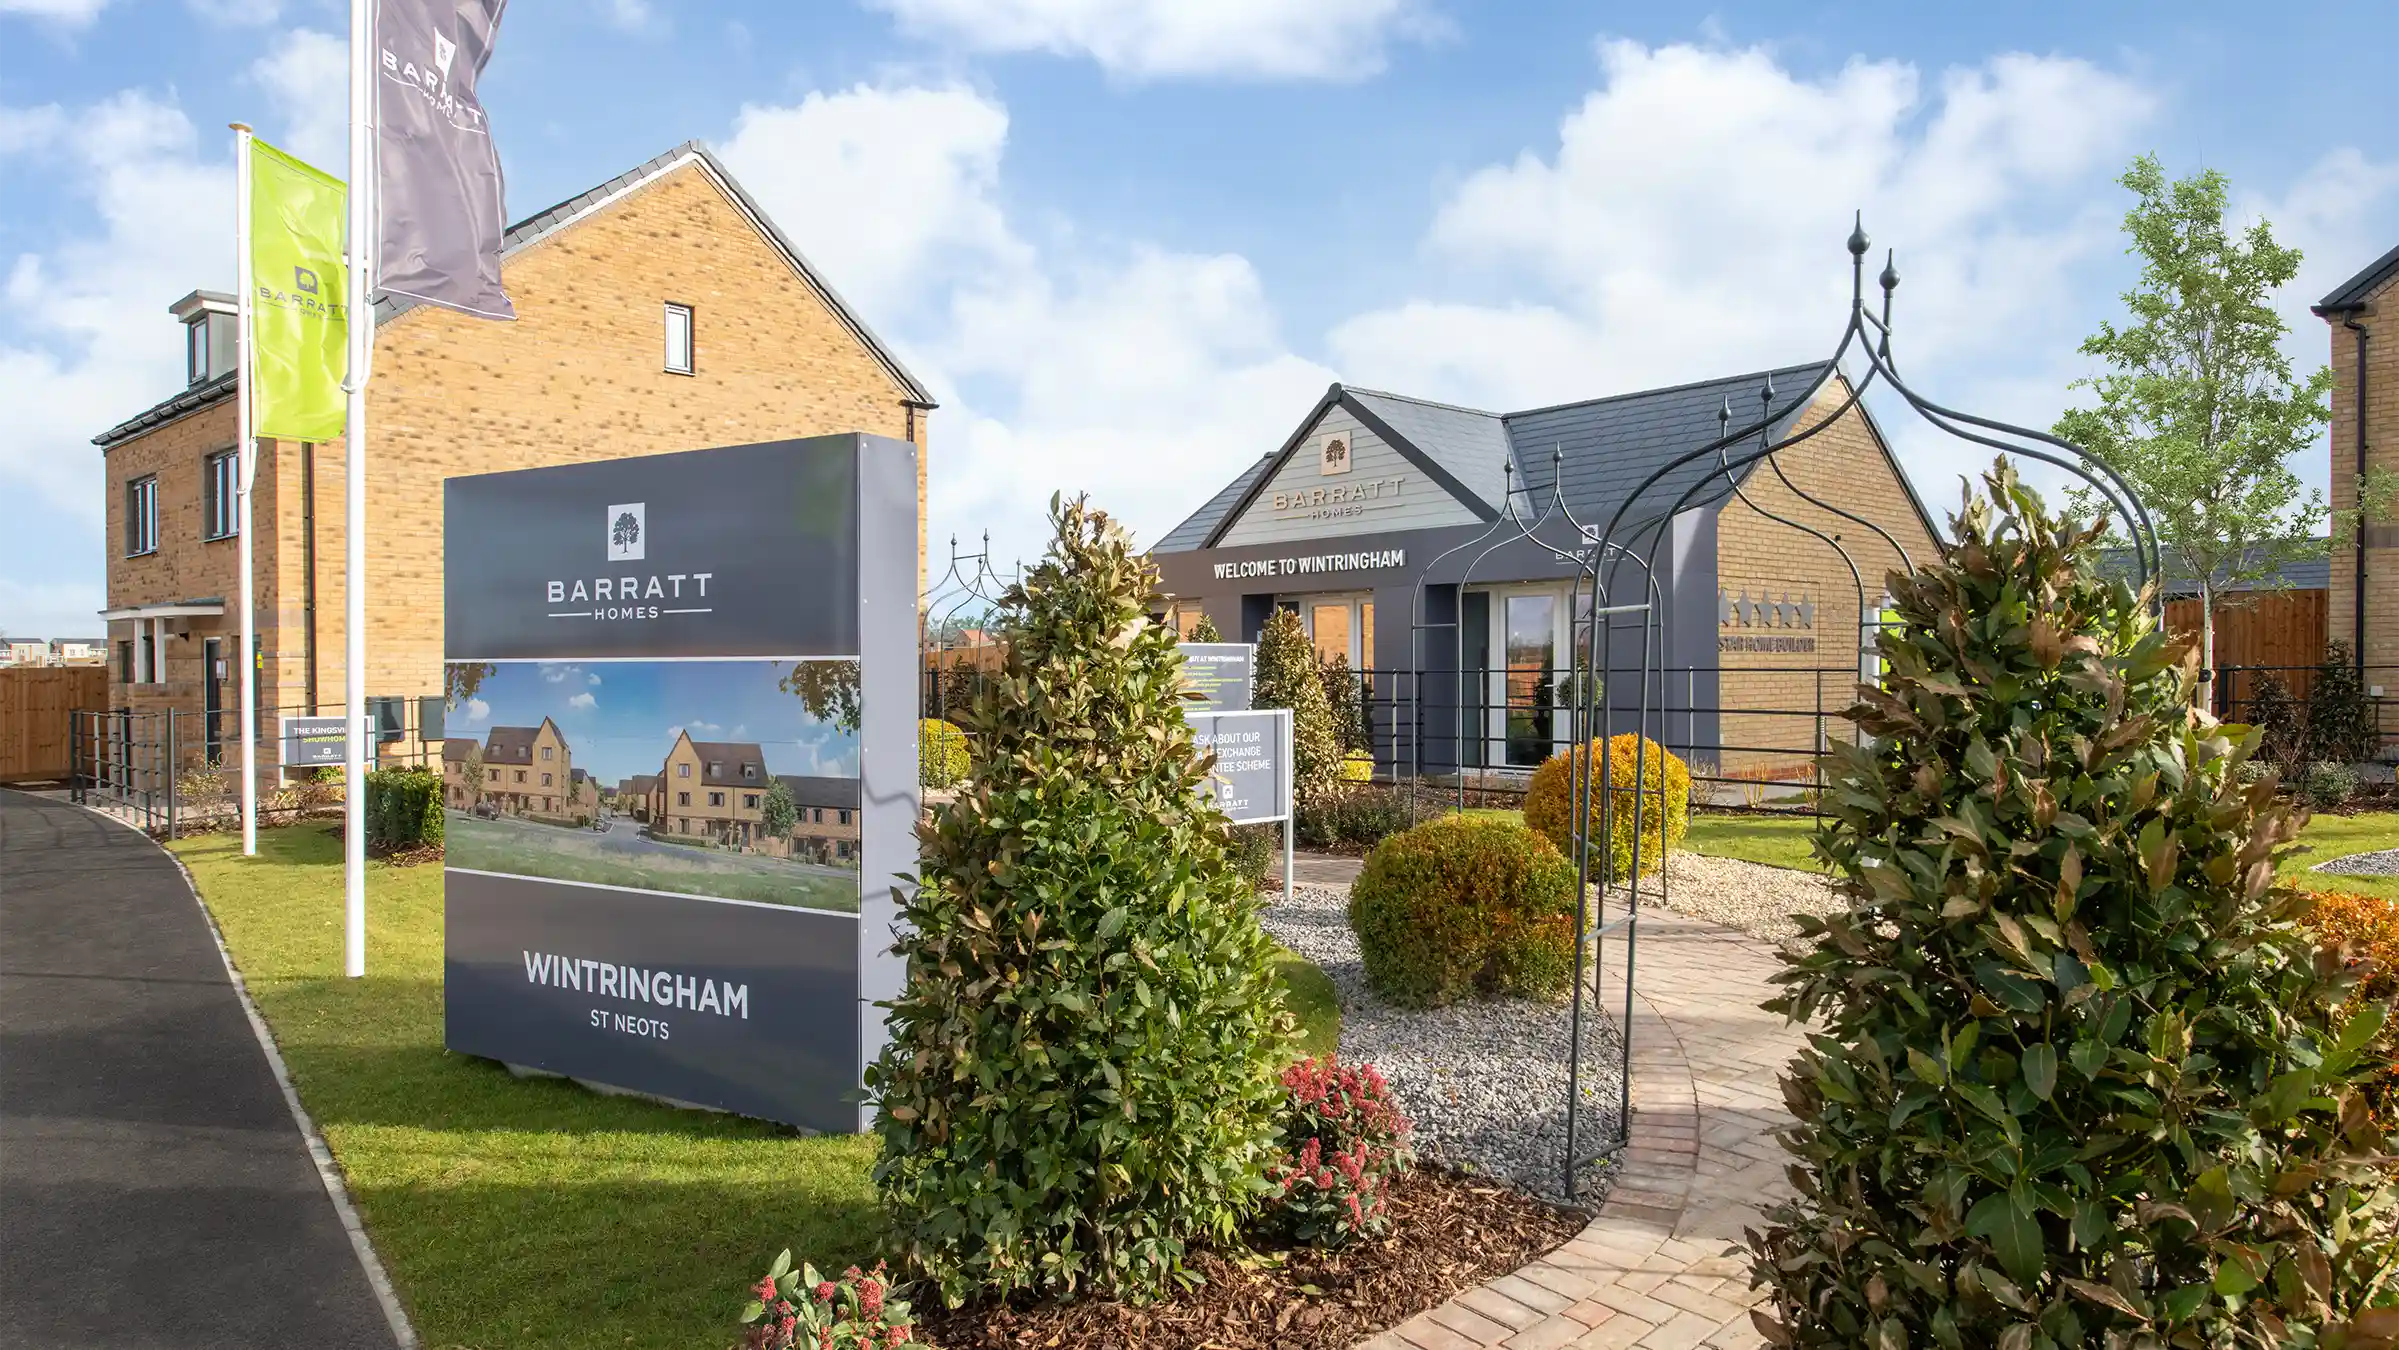 Artist's impression of Barratt houses and sales office at Wintringham